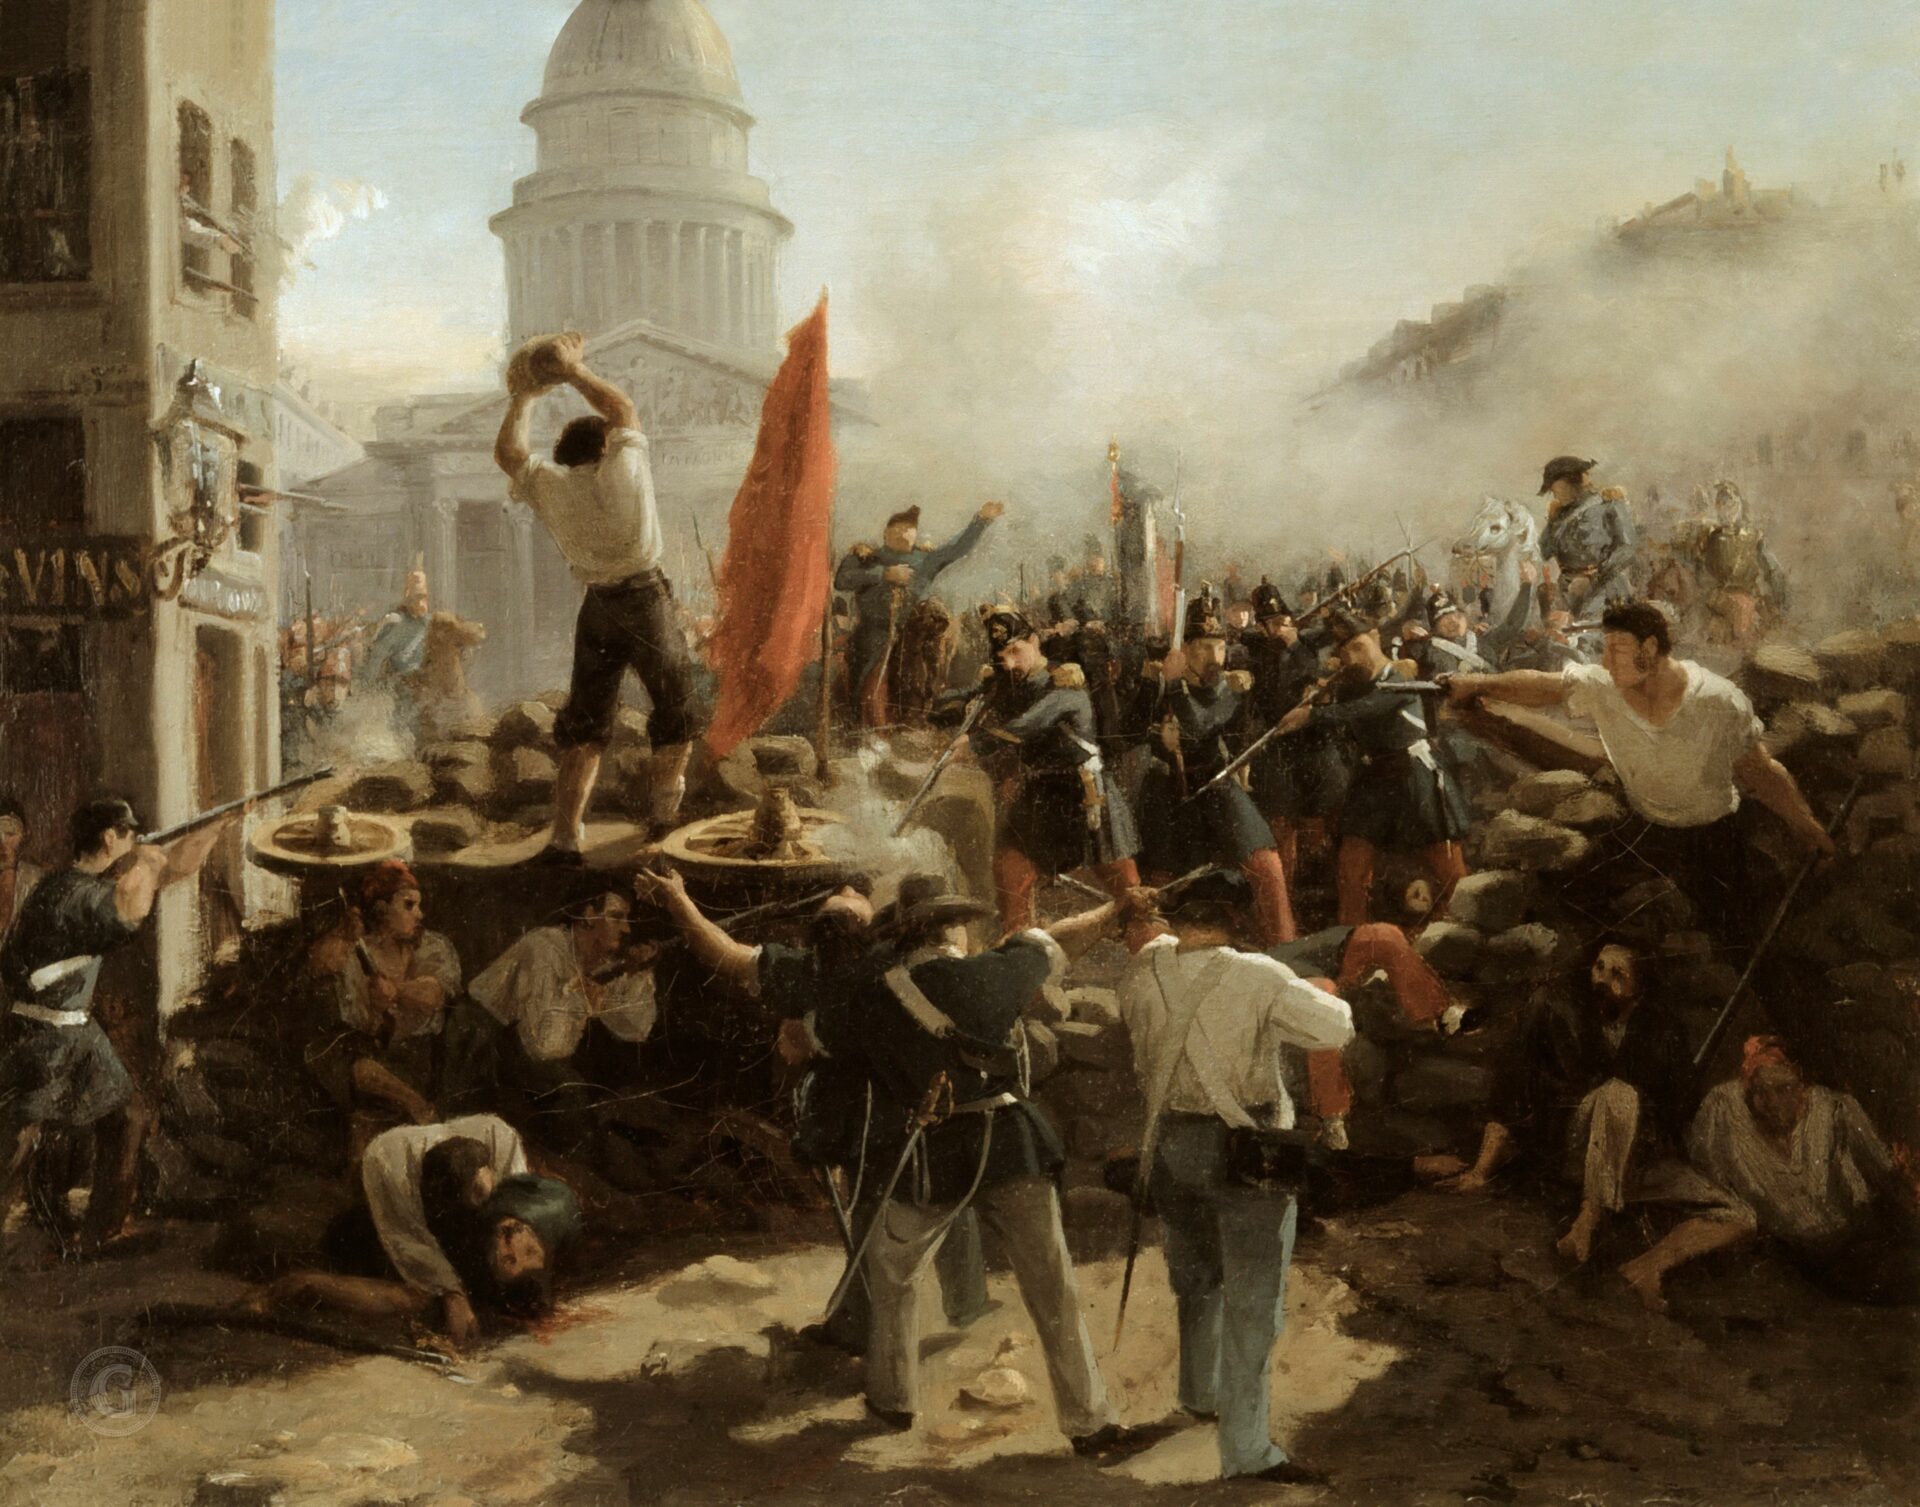 Germany | The Revolutions of 1848